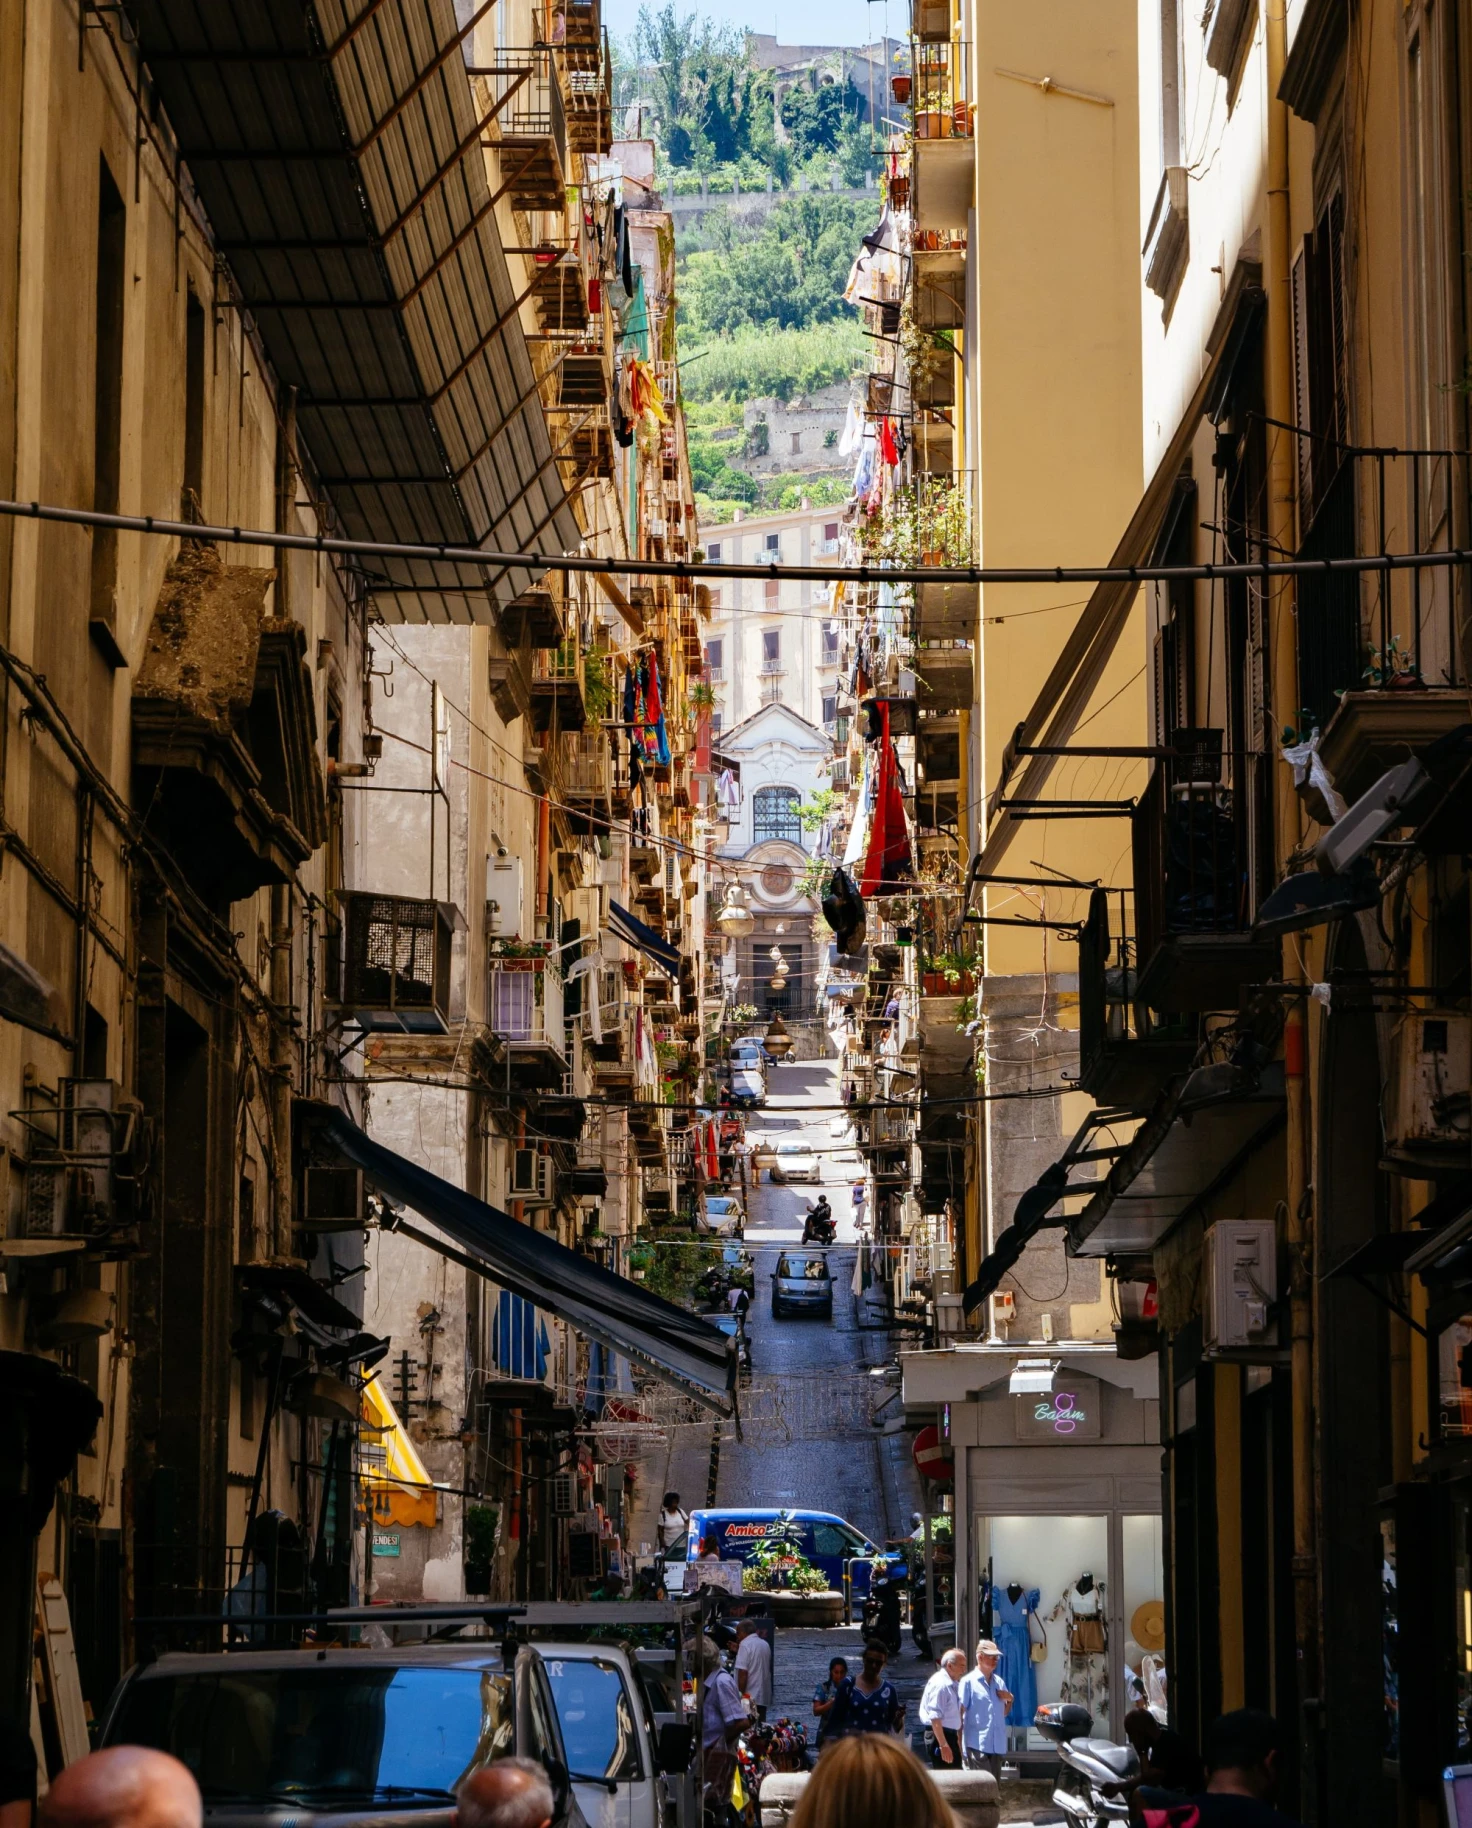 narrow city streets filled with restaurants, shops and pedestrians